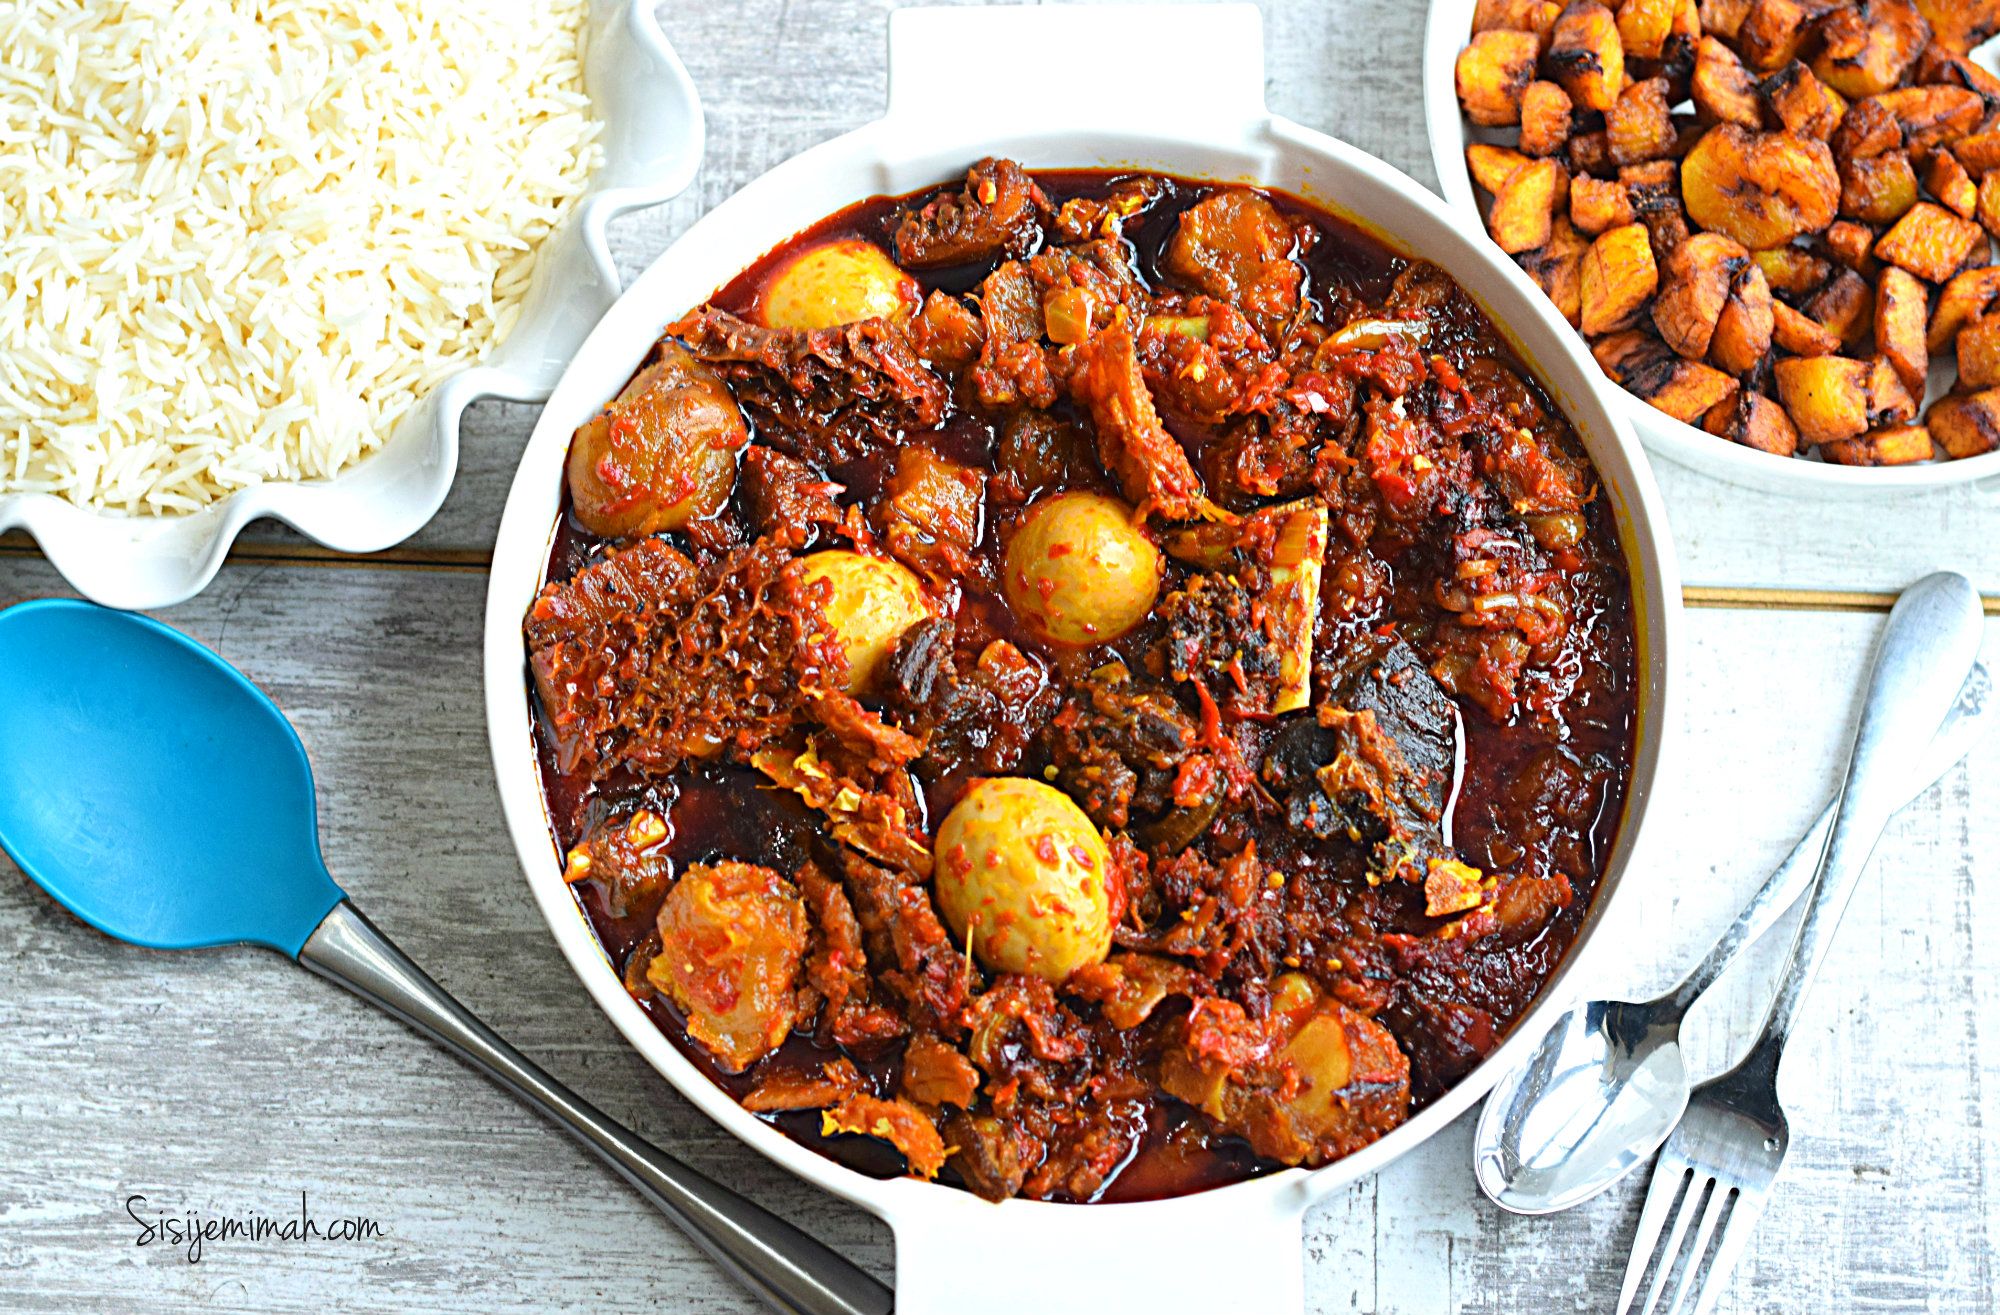 ofada-stew-the-rich-and-spicy-delight-of-nigerian-cuisine